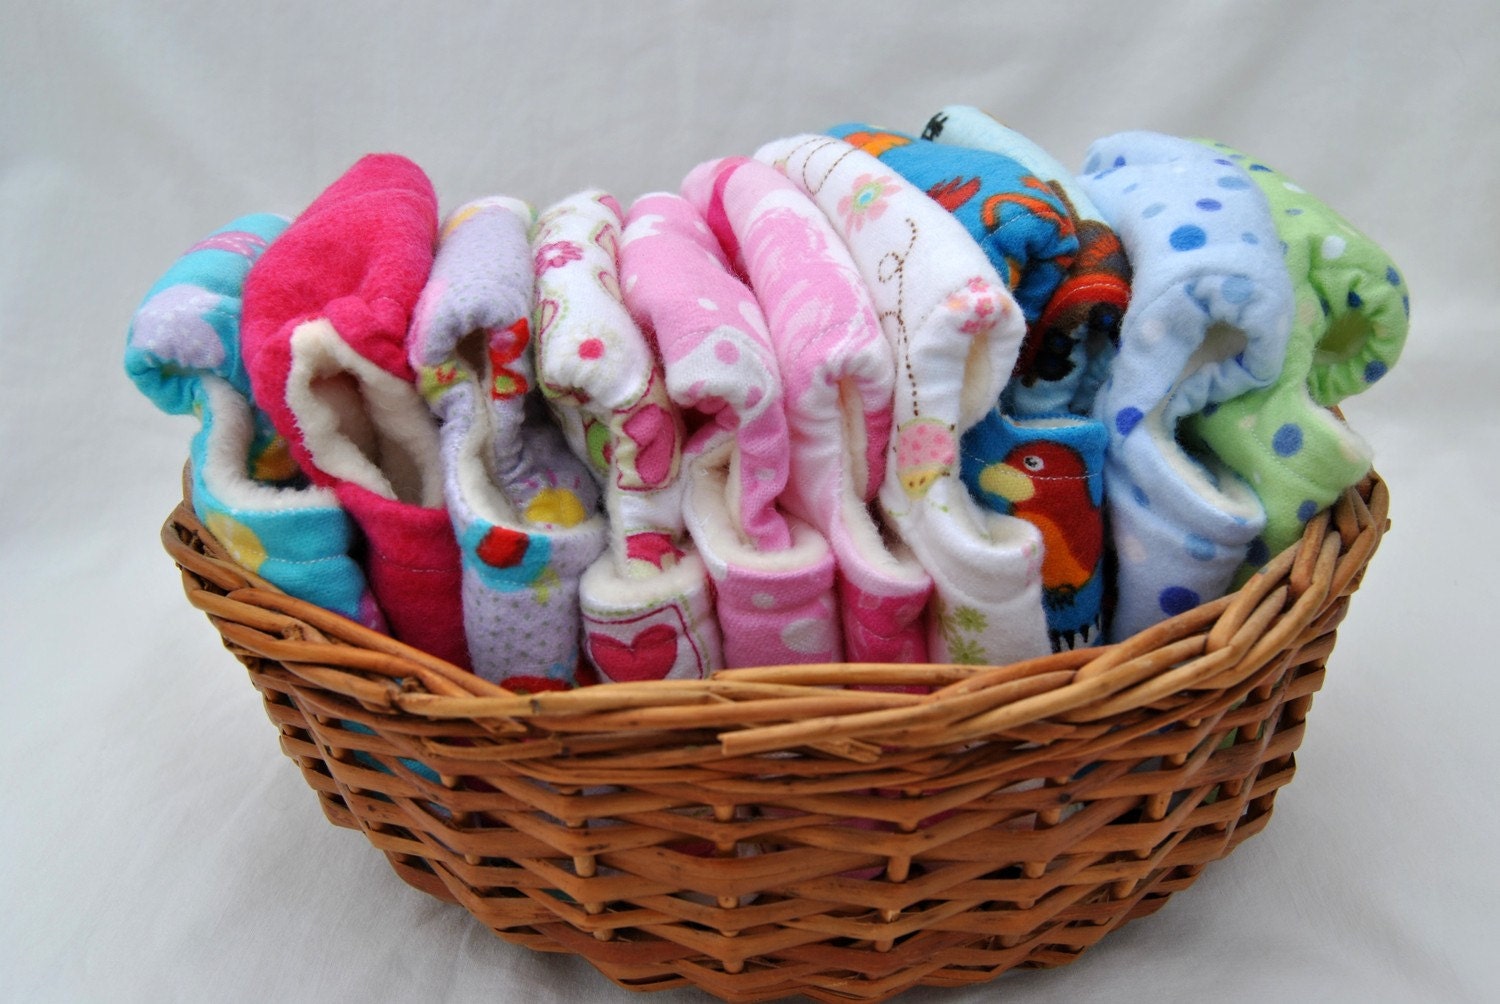 The Dot Collection - Flannel and Fleece Baby Doll Cloth Diapers - Set of two diapers.